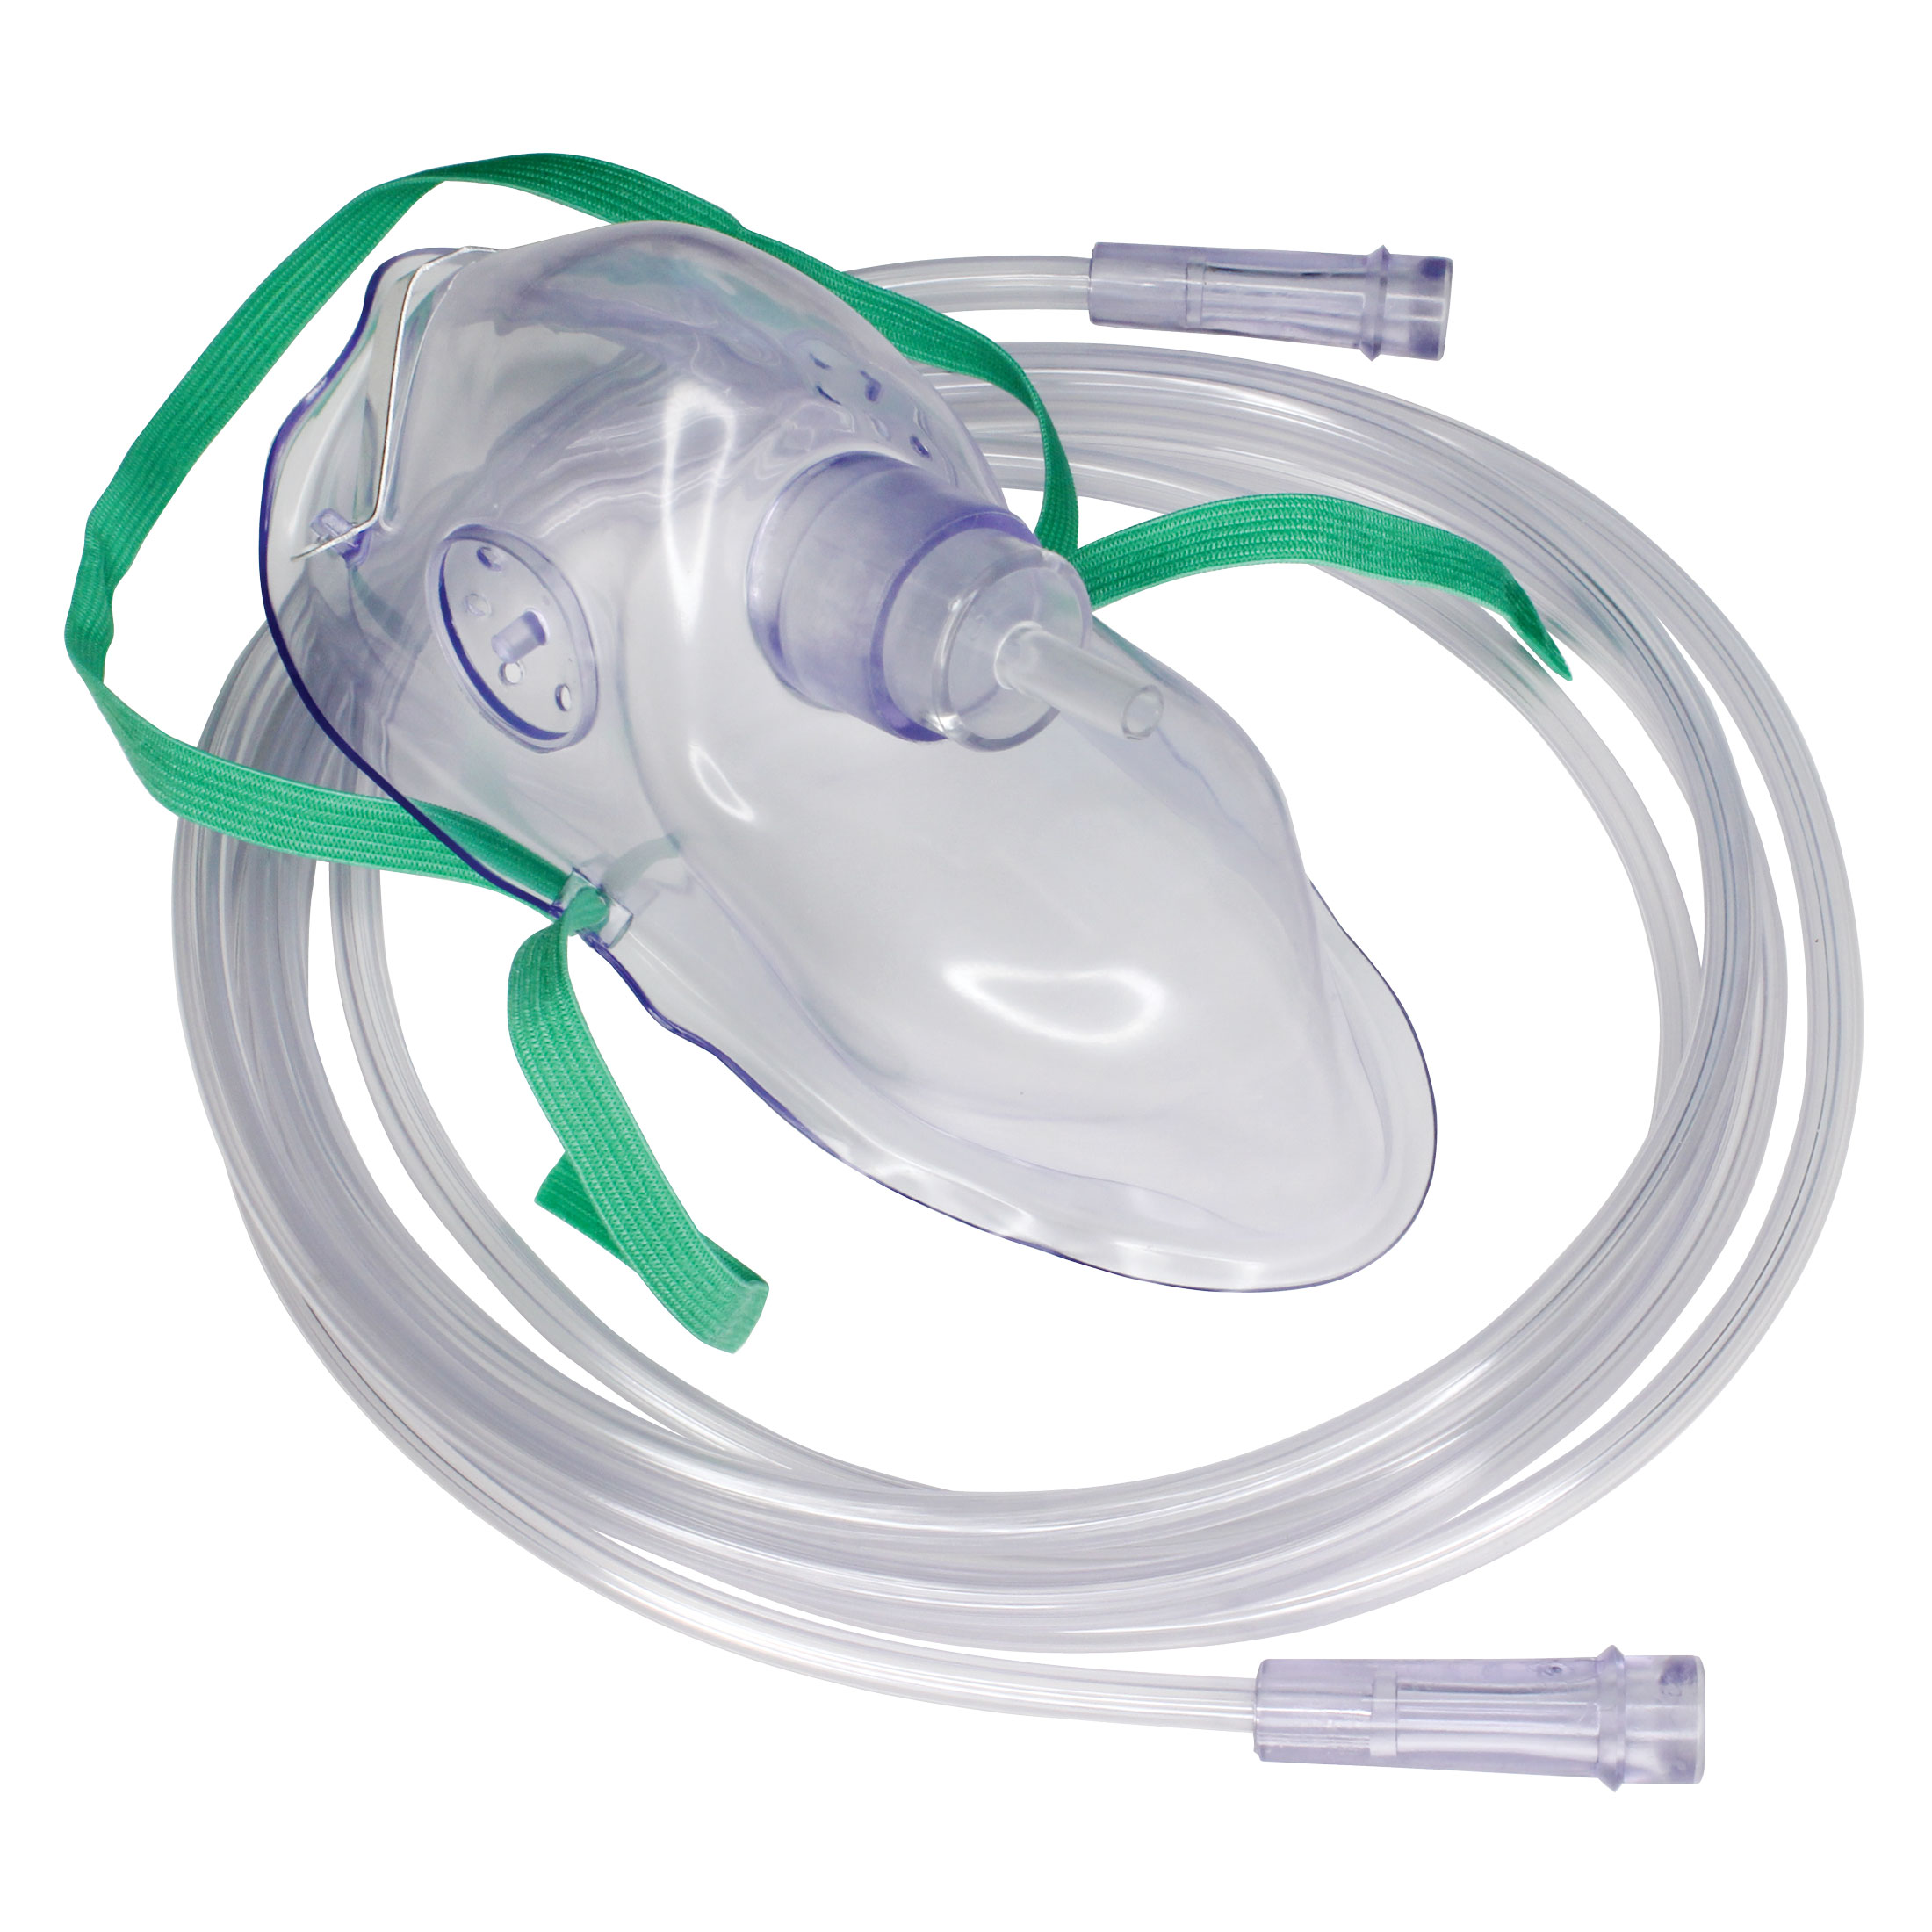 Photograph of RES2100 Simple O2 Mask